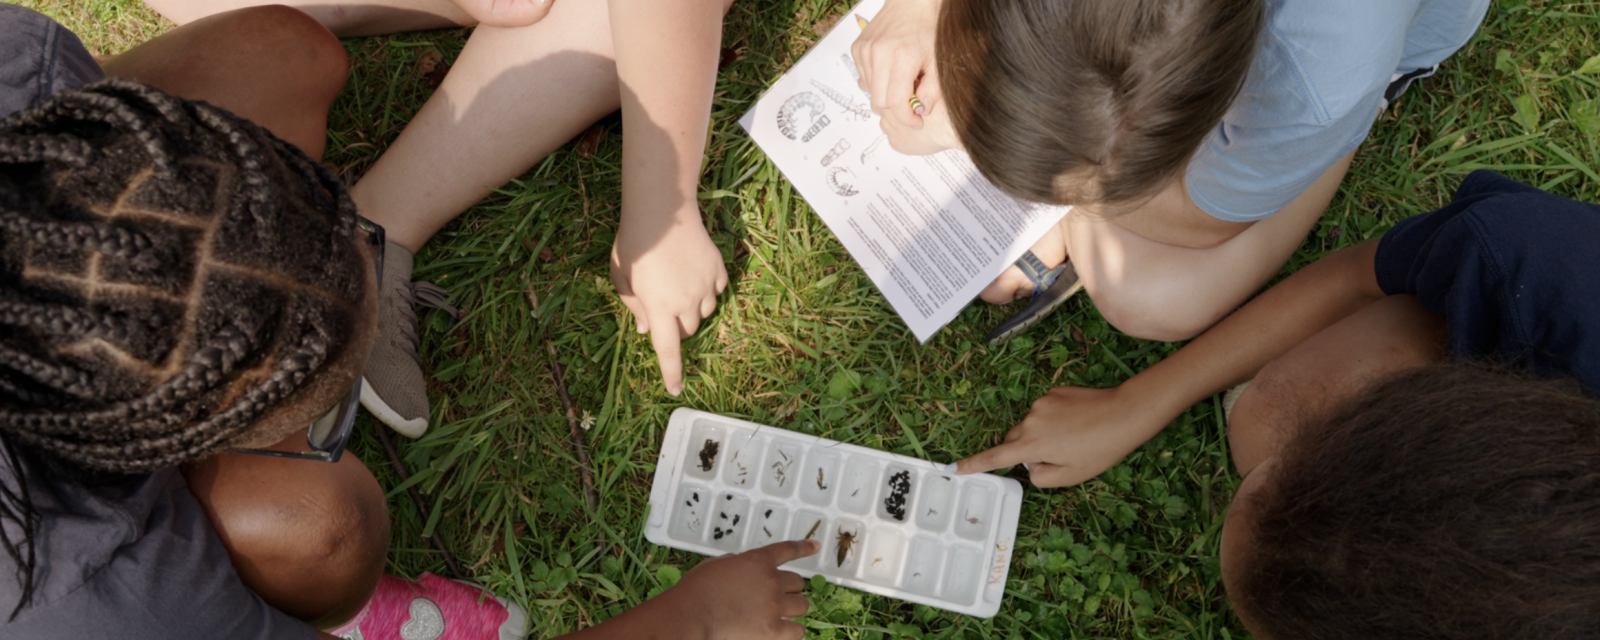 Children participating in Creek Week in North Carolina making observations and recording data outdoors